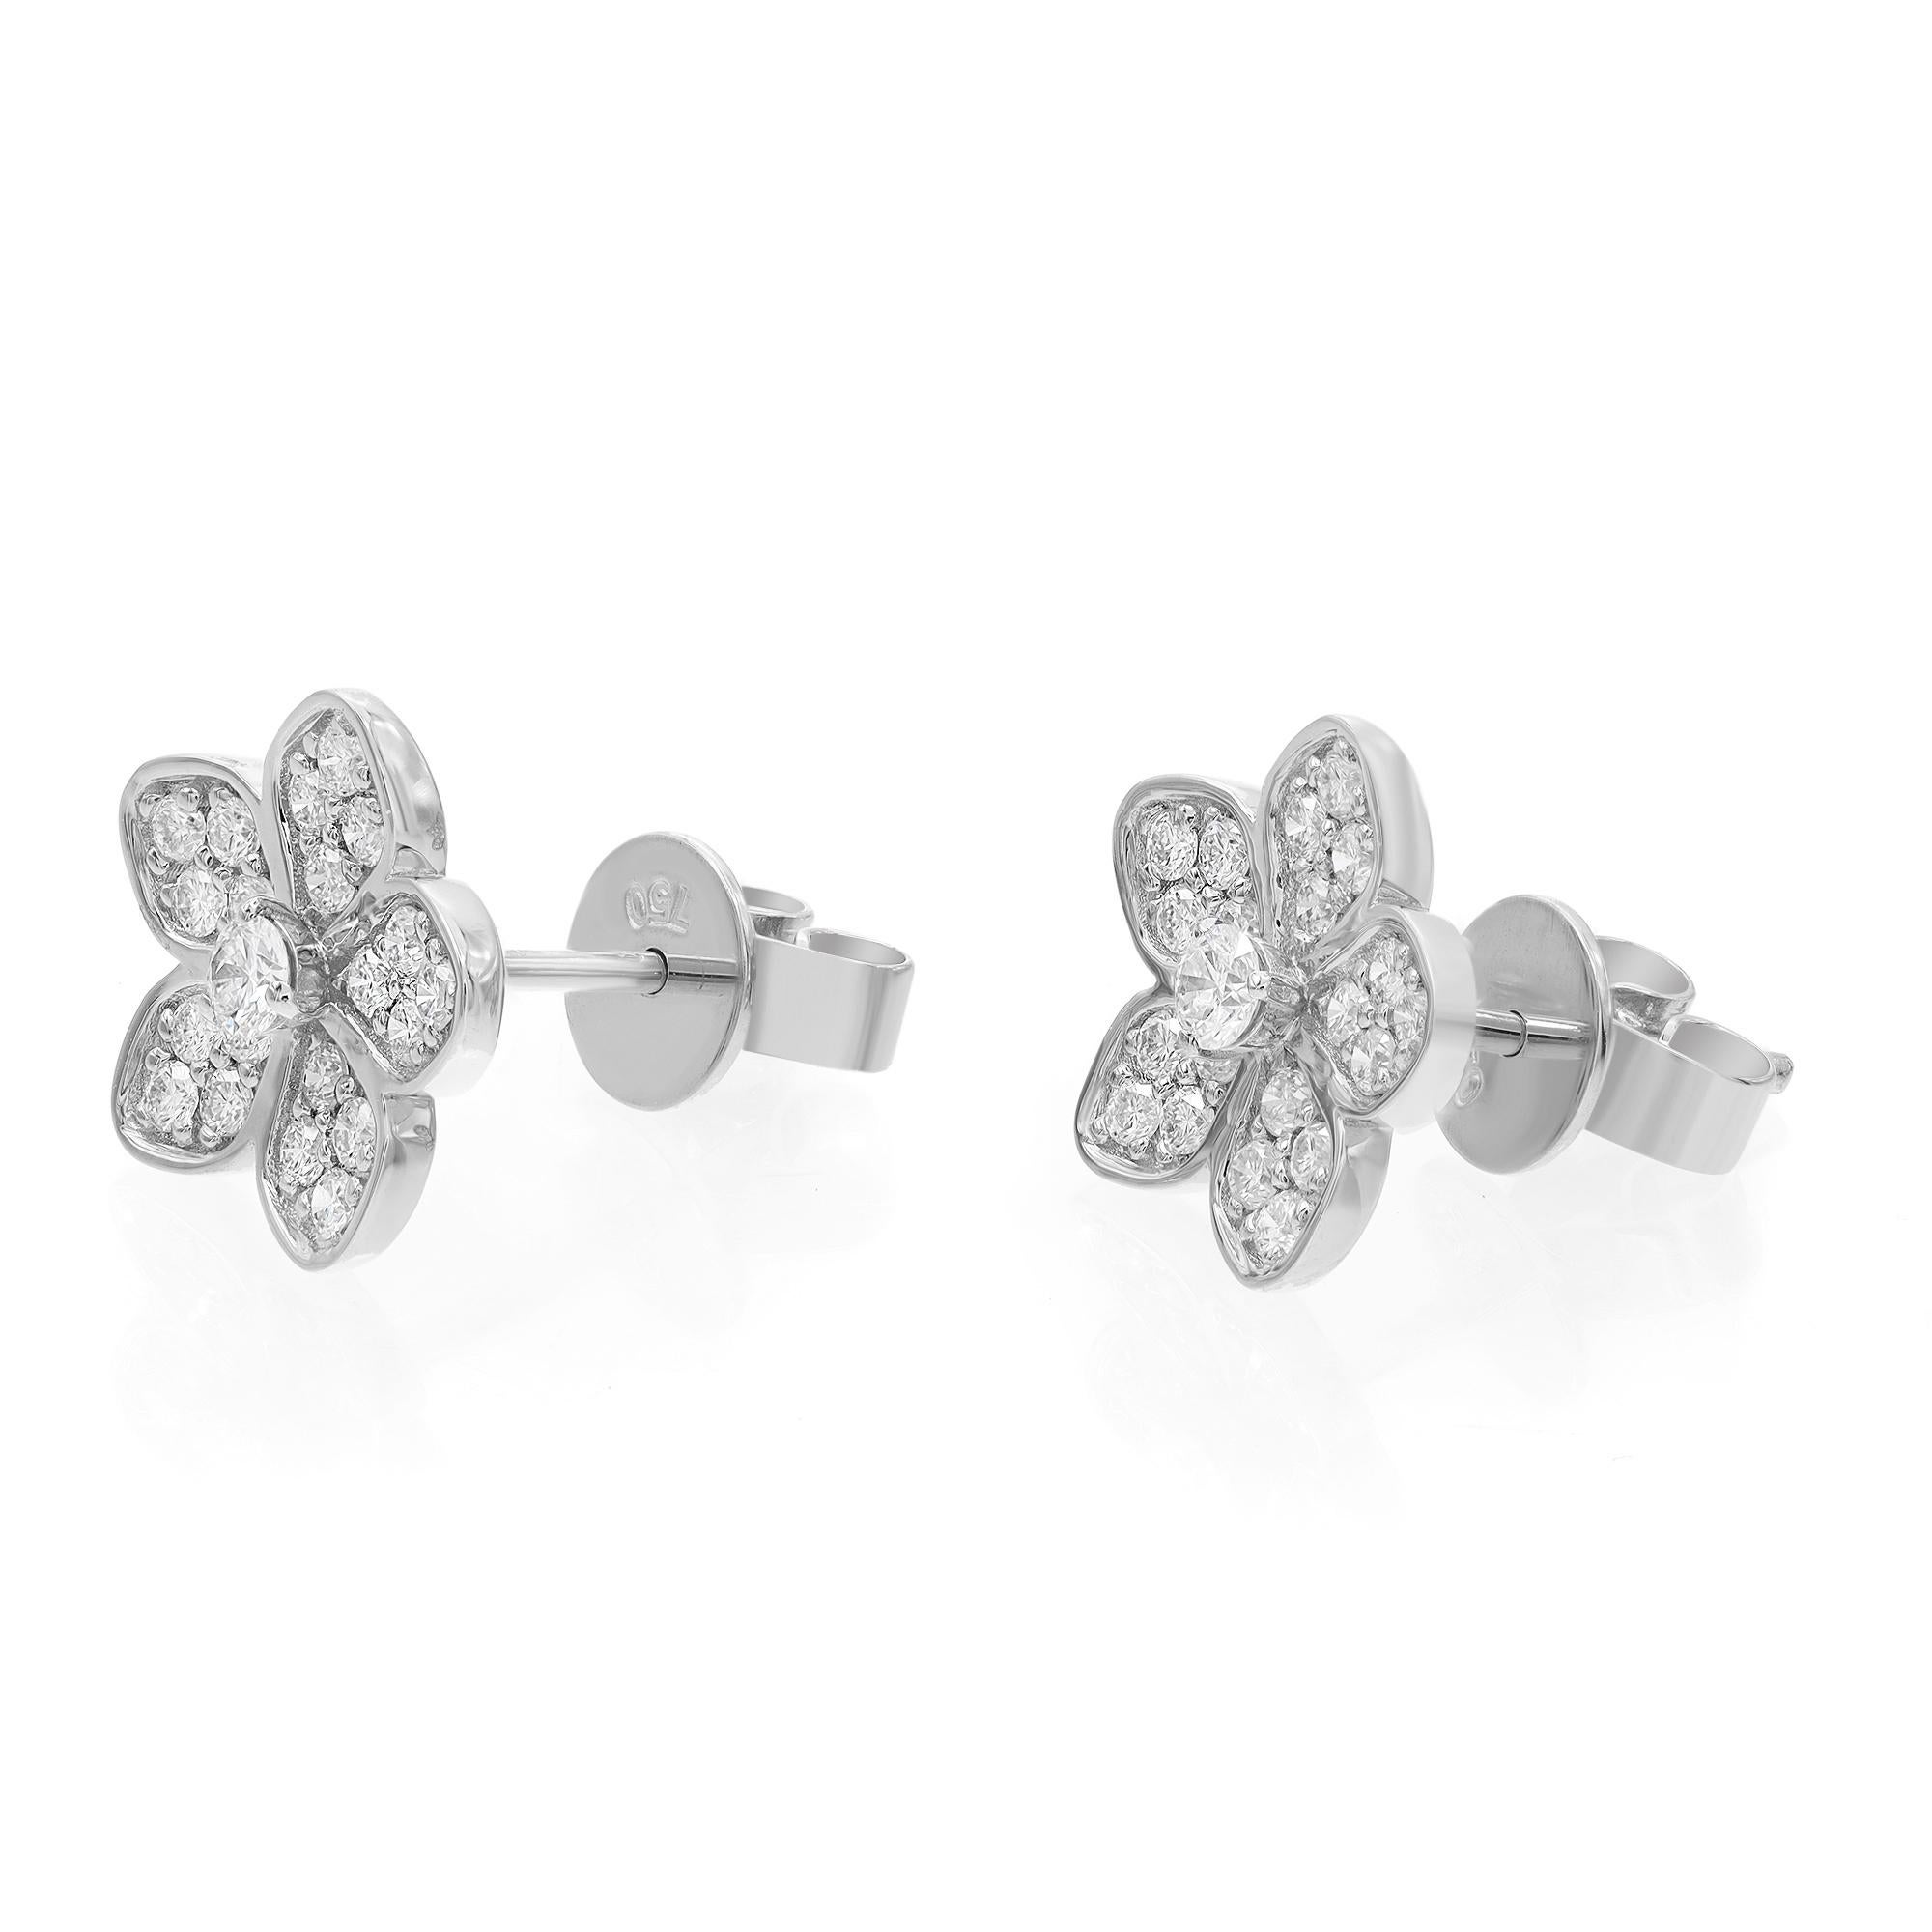 These fanciful flowers are reminiscent of springtime blooms. Featuring diamond flower stud earrings crafted in 18k white gold. These earrings are encrusted with pave set round brilliant cut diamonds weighing 0.52 ct. Diamond quality: color G-H and